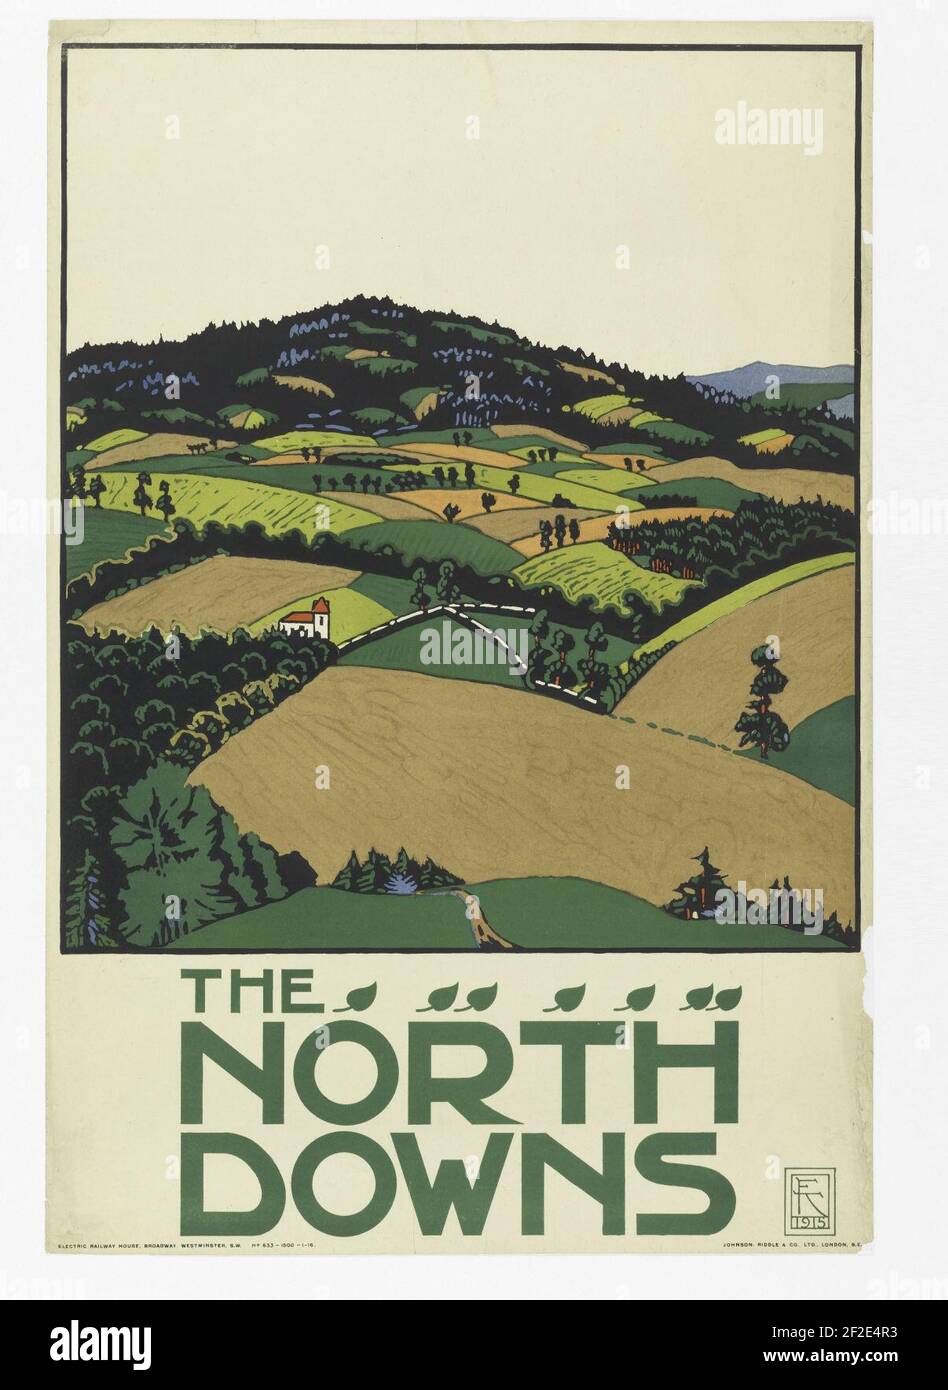 The North Downs 1915 old vintage London poster repro